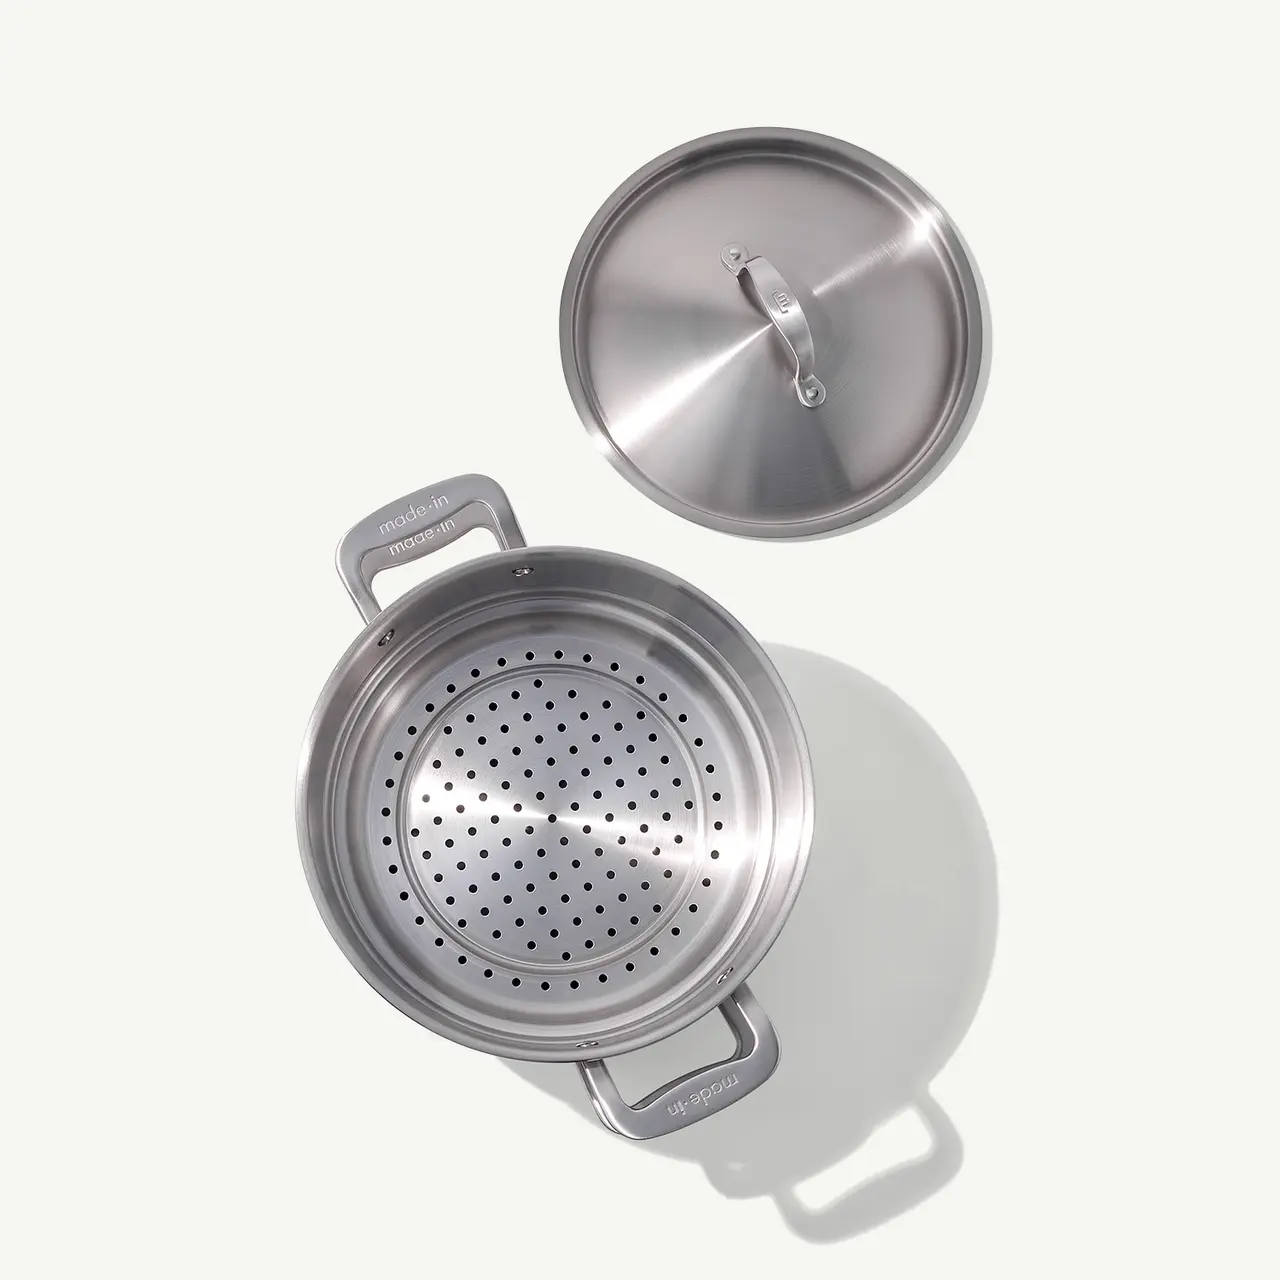 A stainless steel pot with a colander insert is placed next to its lid on a light surface.